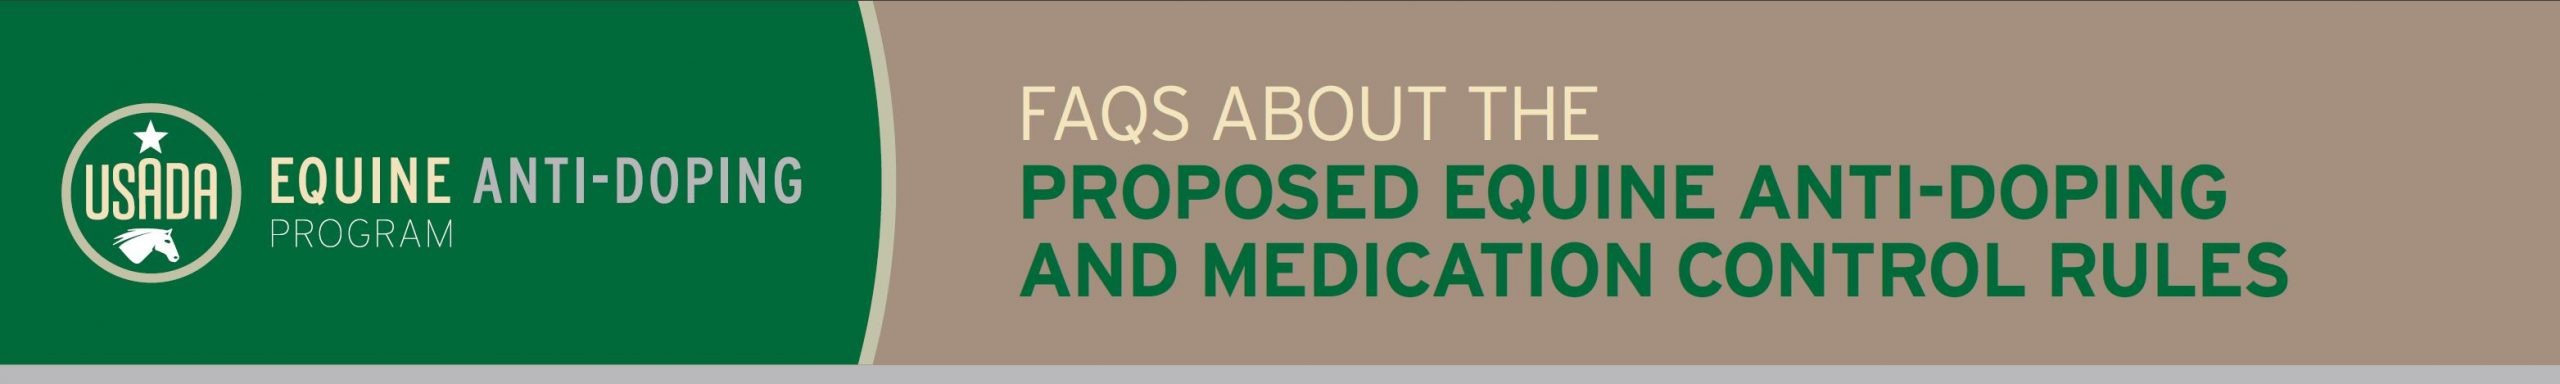 FAQs about the Propsed Equine Anti-doping and Medicatino Control Rules header image.